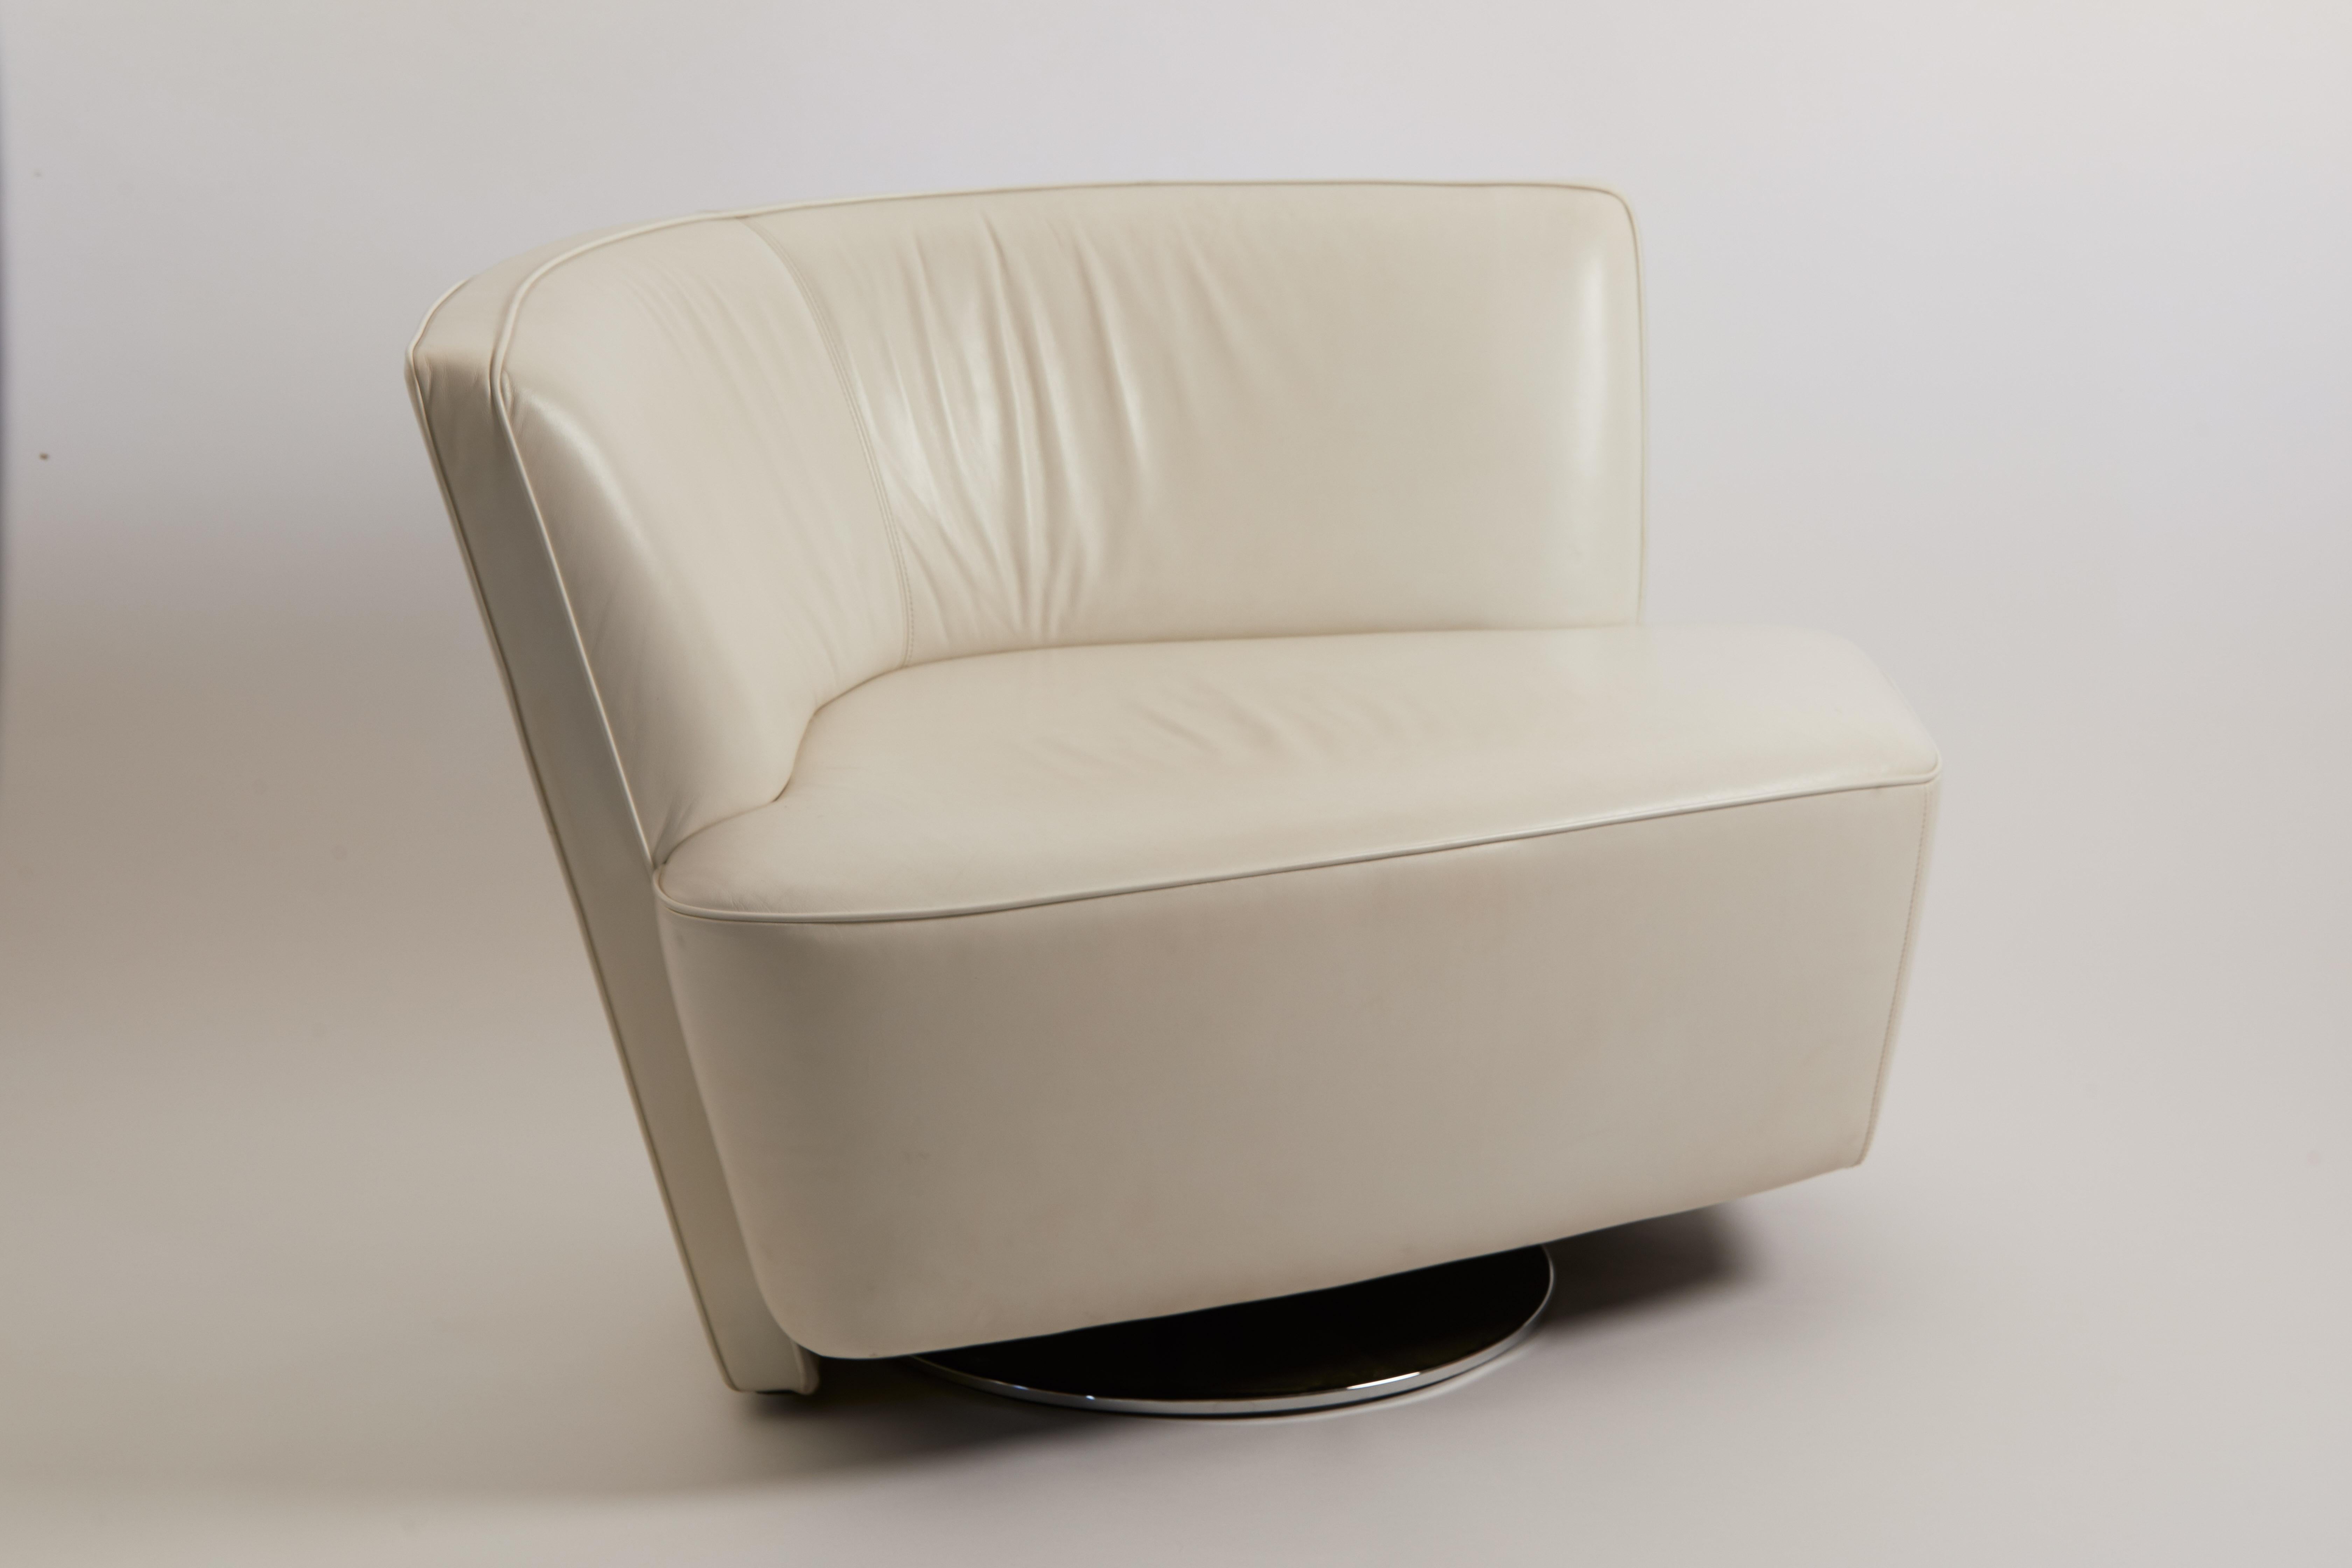 1970s German pair of Walter knoll drift chairs in white leather with swivel mechanism.